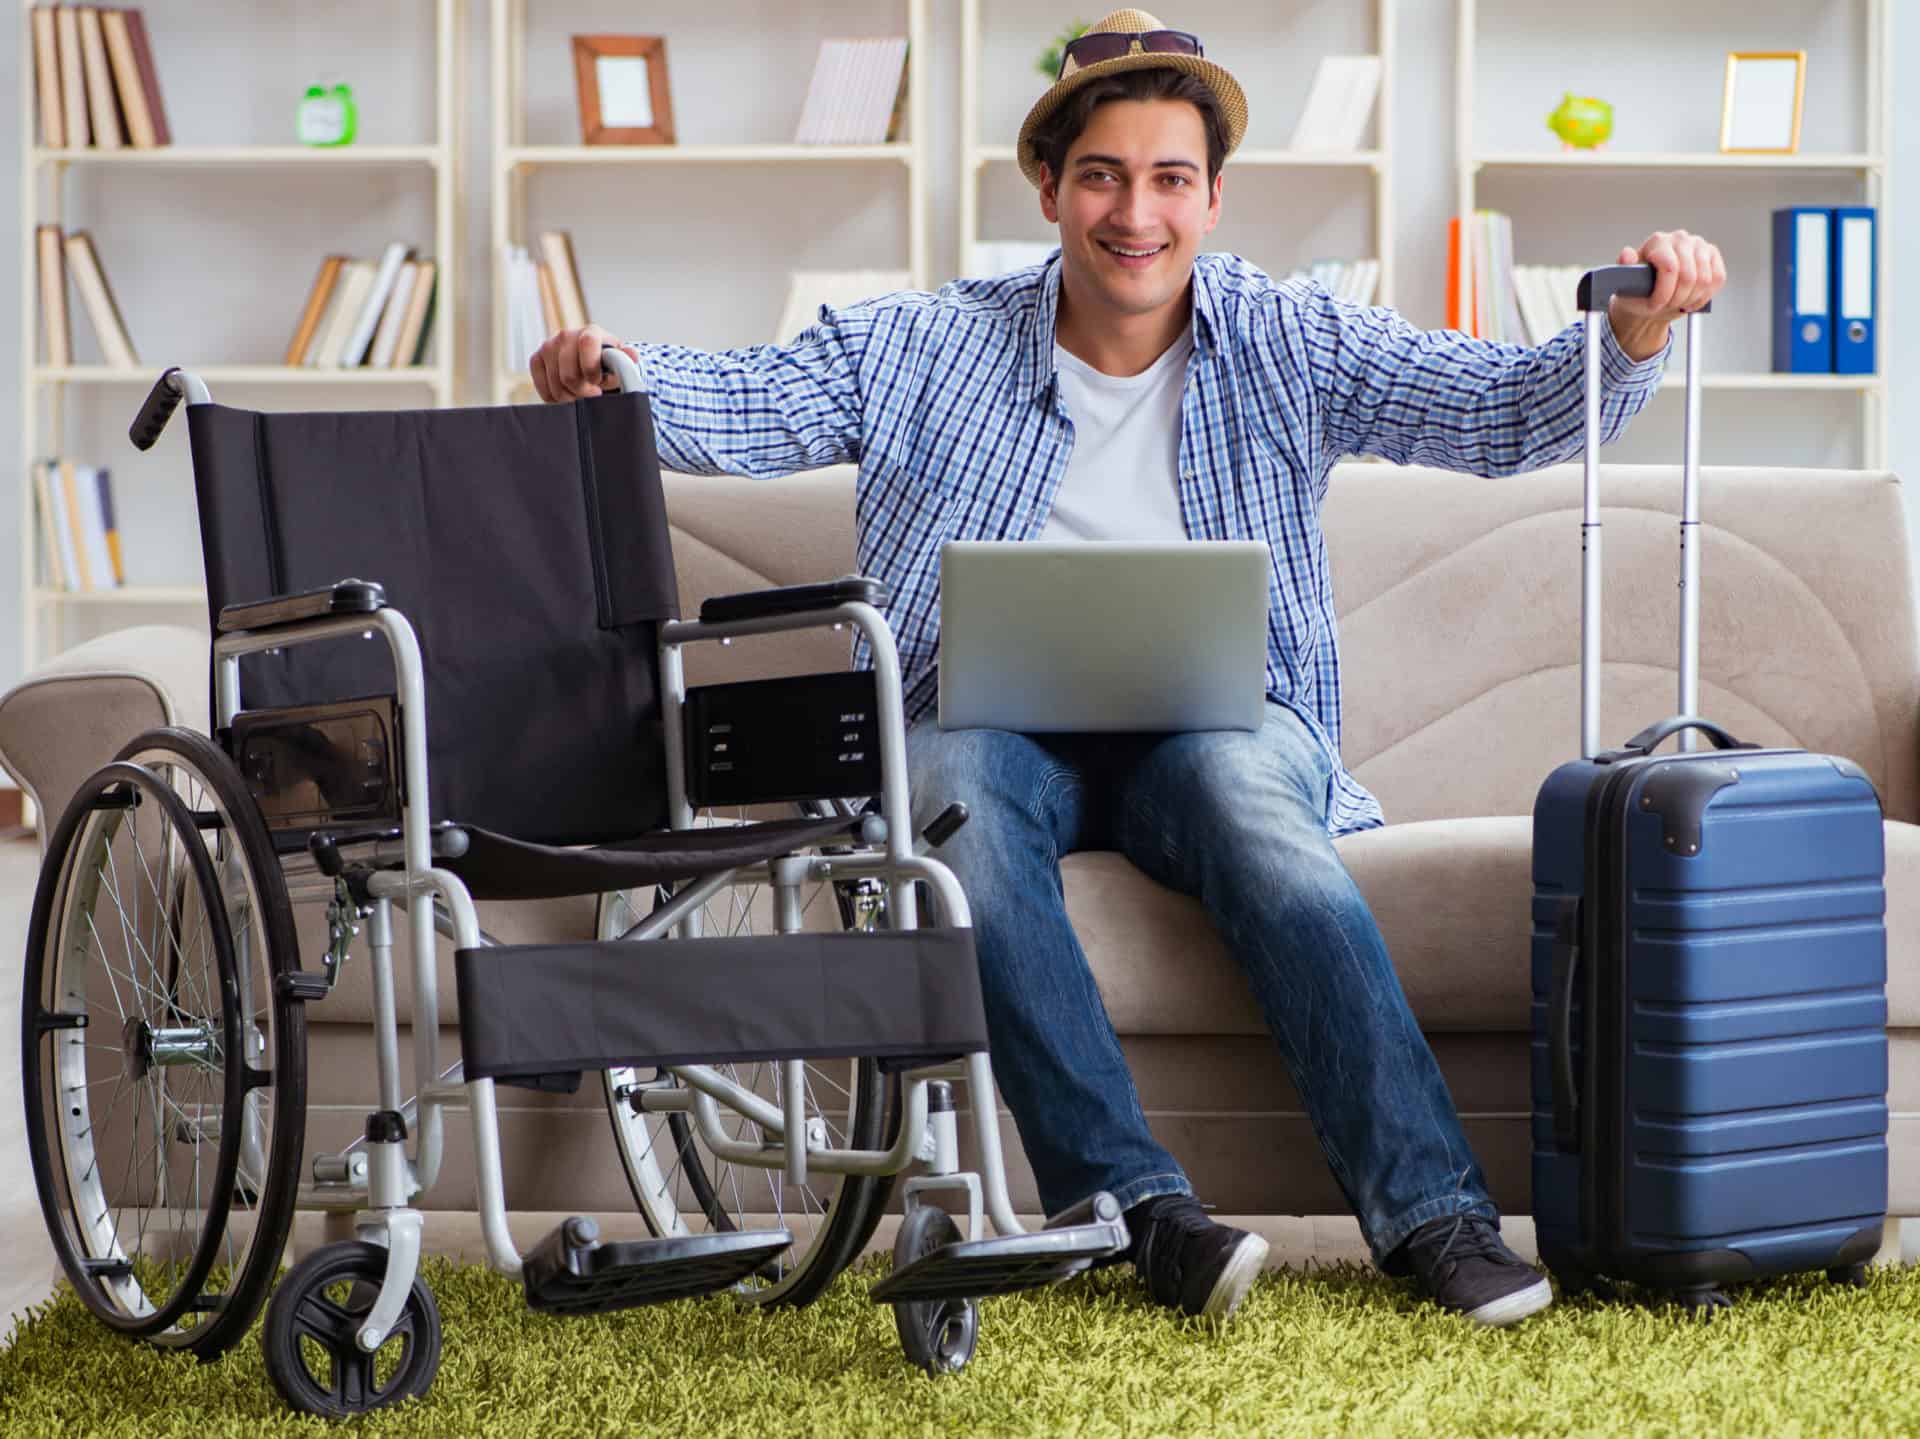 Disabled,Man,Booking,Travel,Online,Using,Laptop,Computer